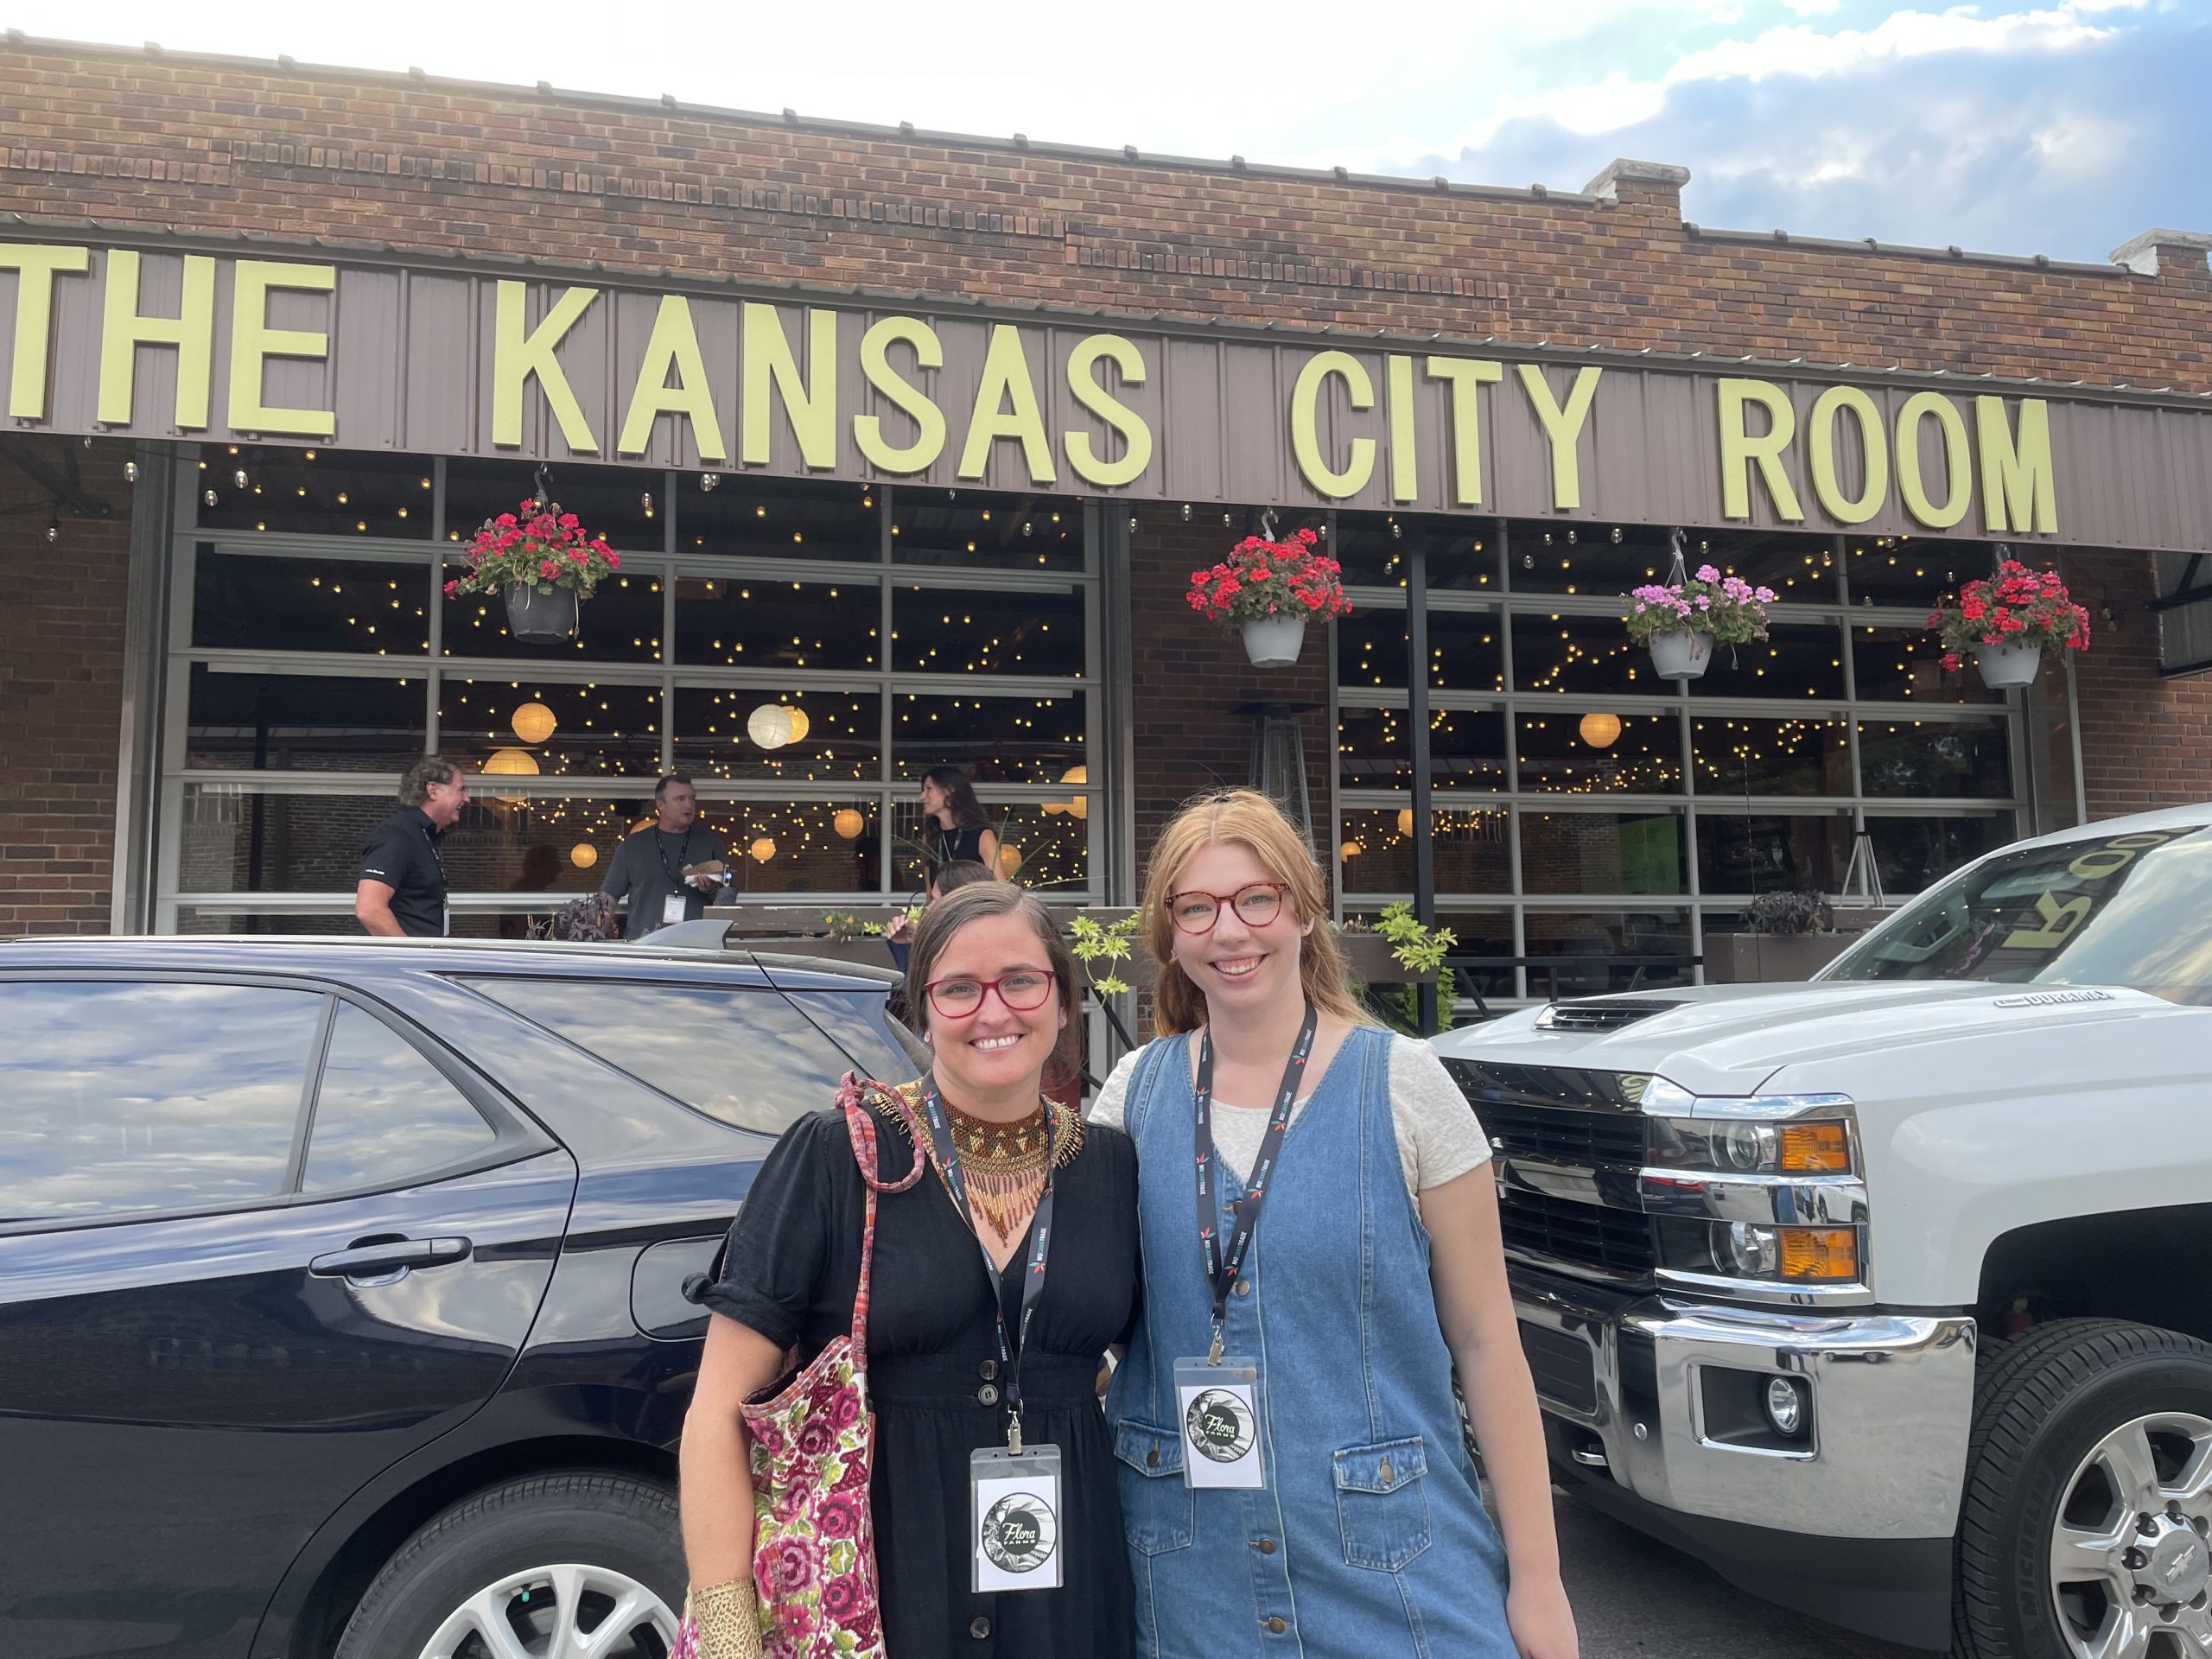 Marketing team poses in front of the Kansas City Room venue